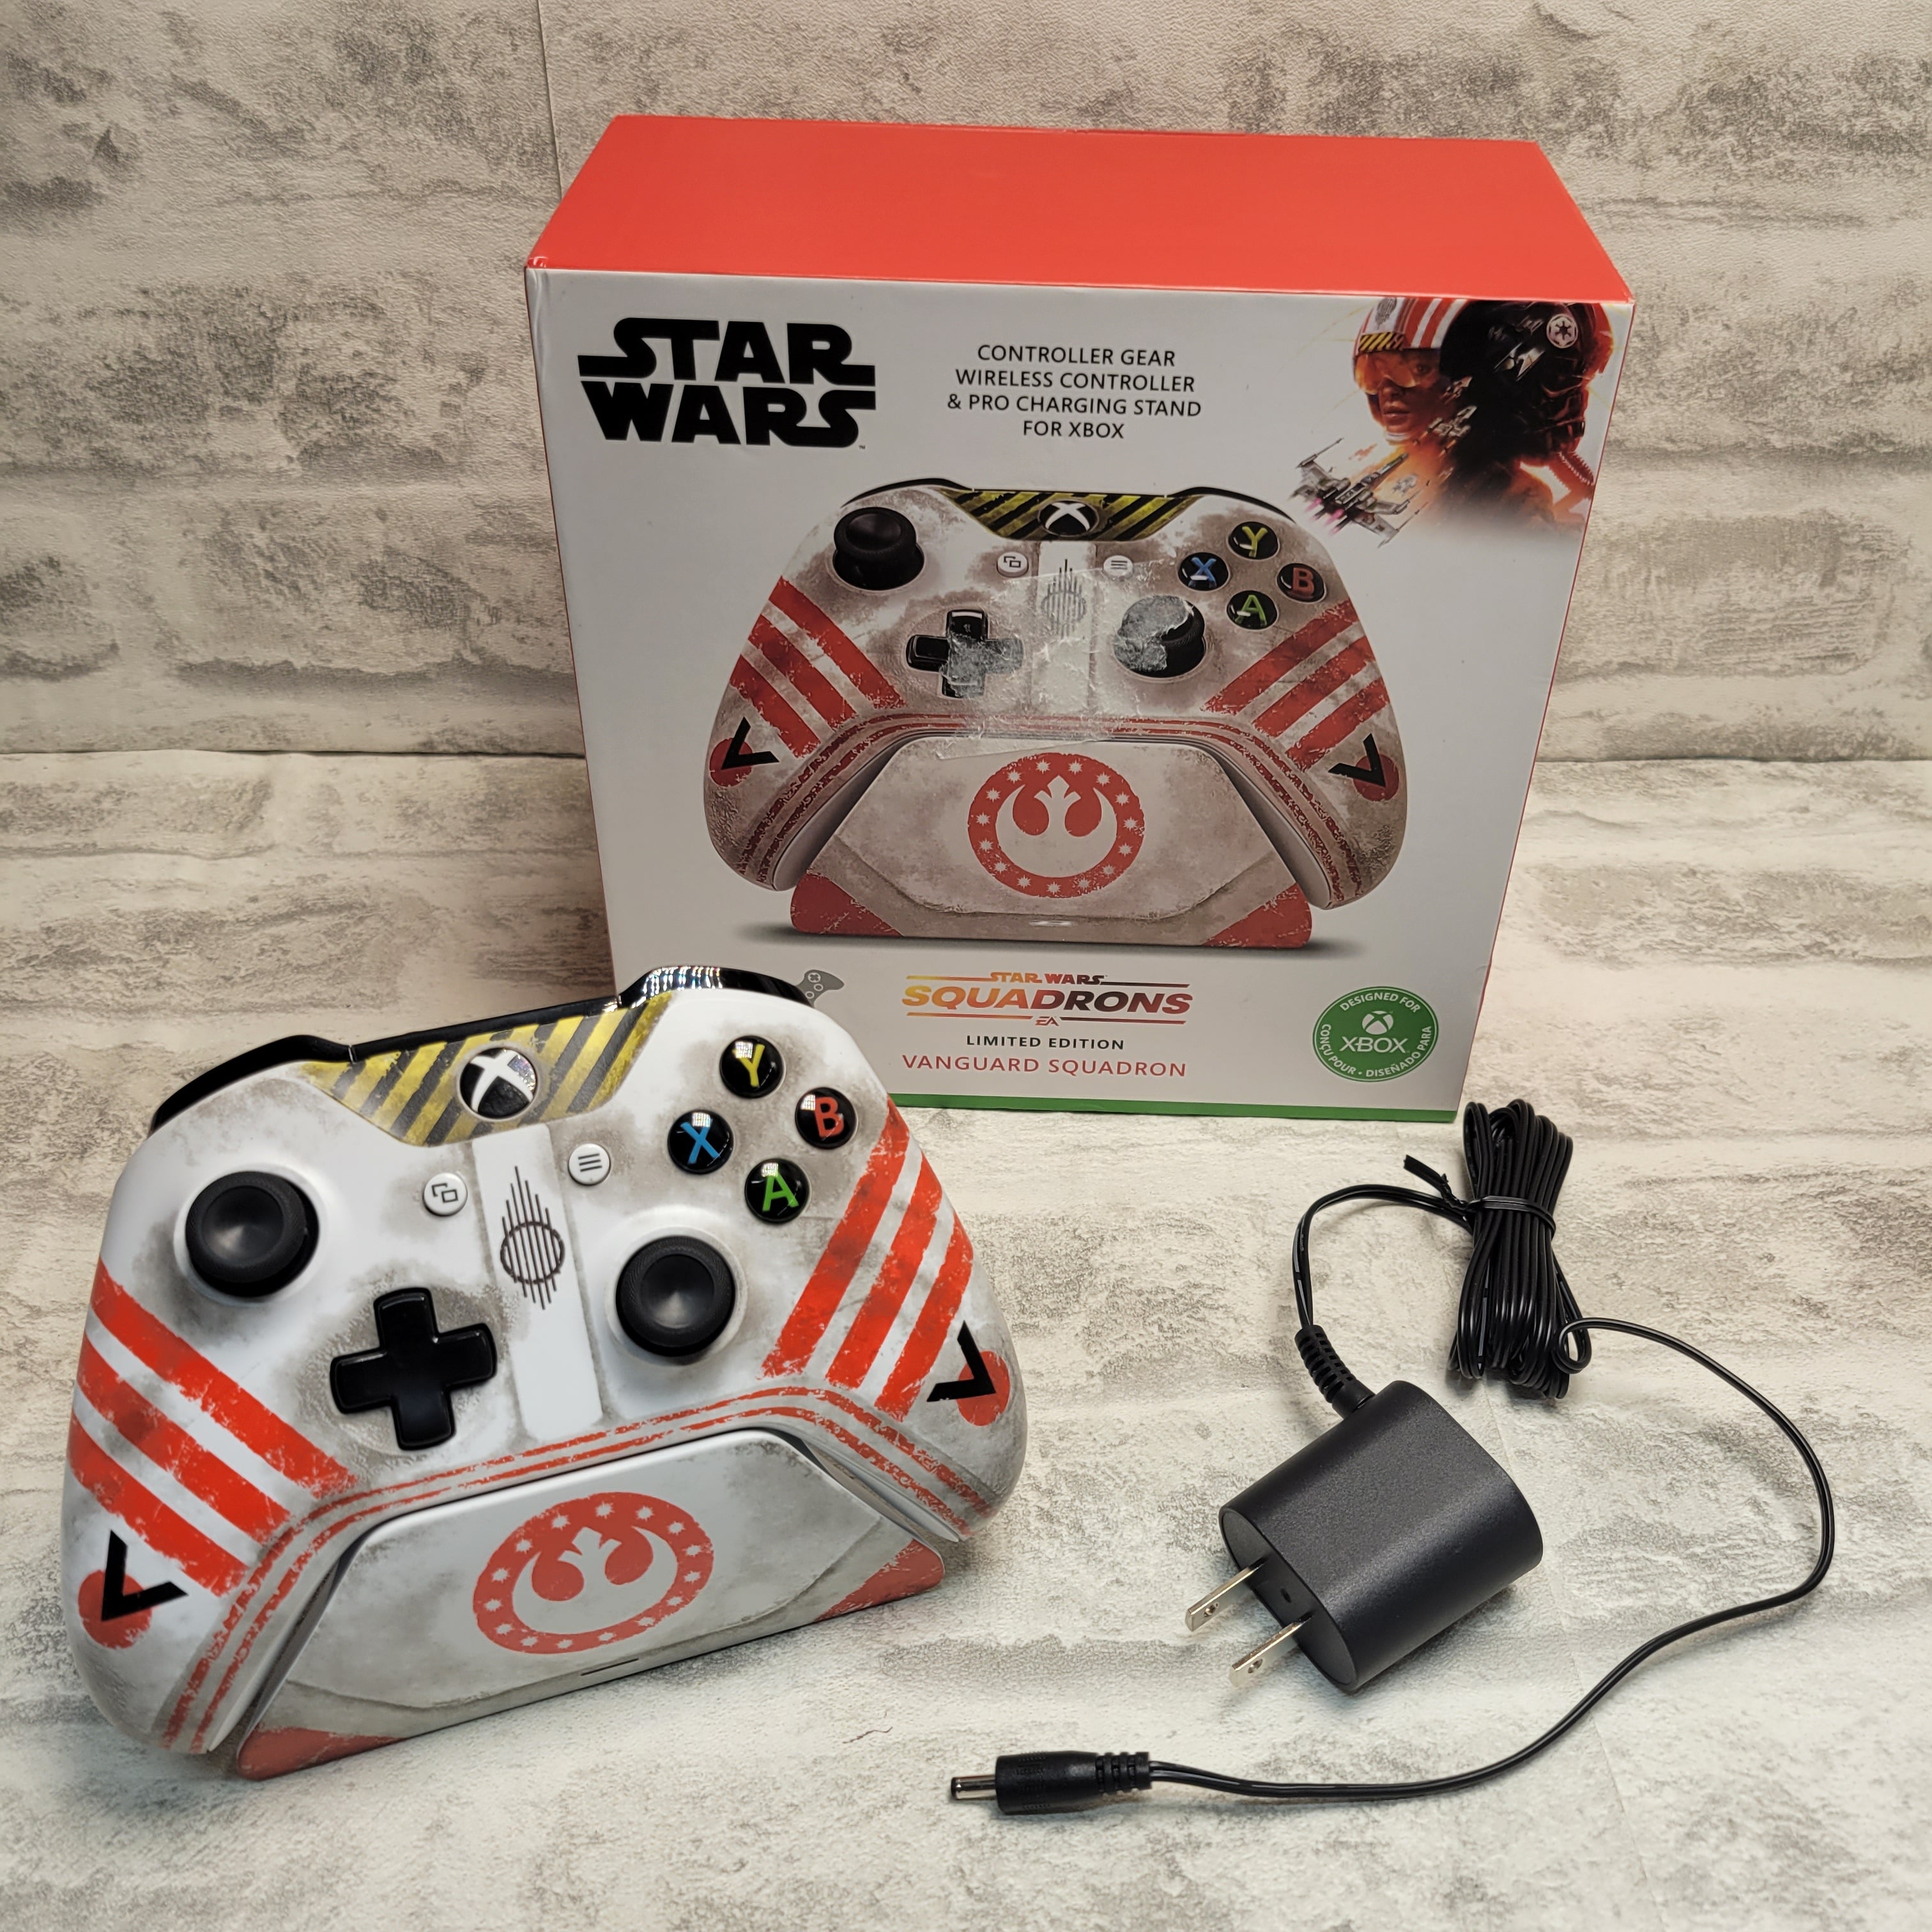 Controller Gear Star Wars: Squadrons, Xbox Wireless Controller + Pro Charging Stand Bundle for Xbox-Limited Edition-Xbox One (7783061520622)